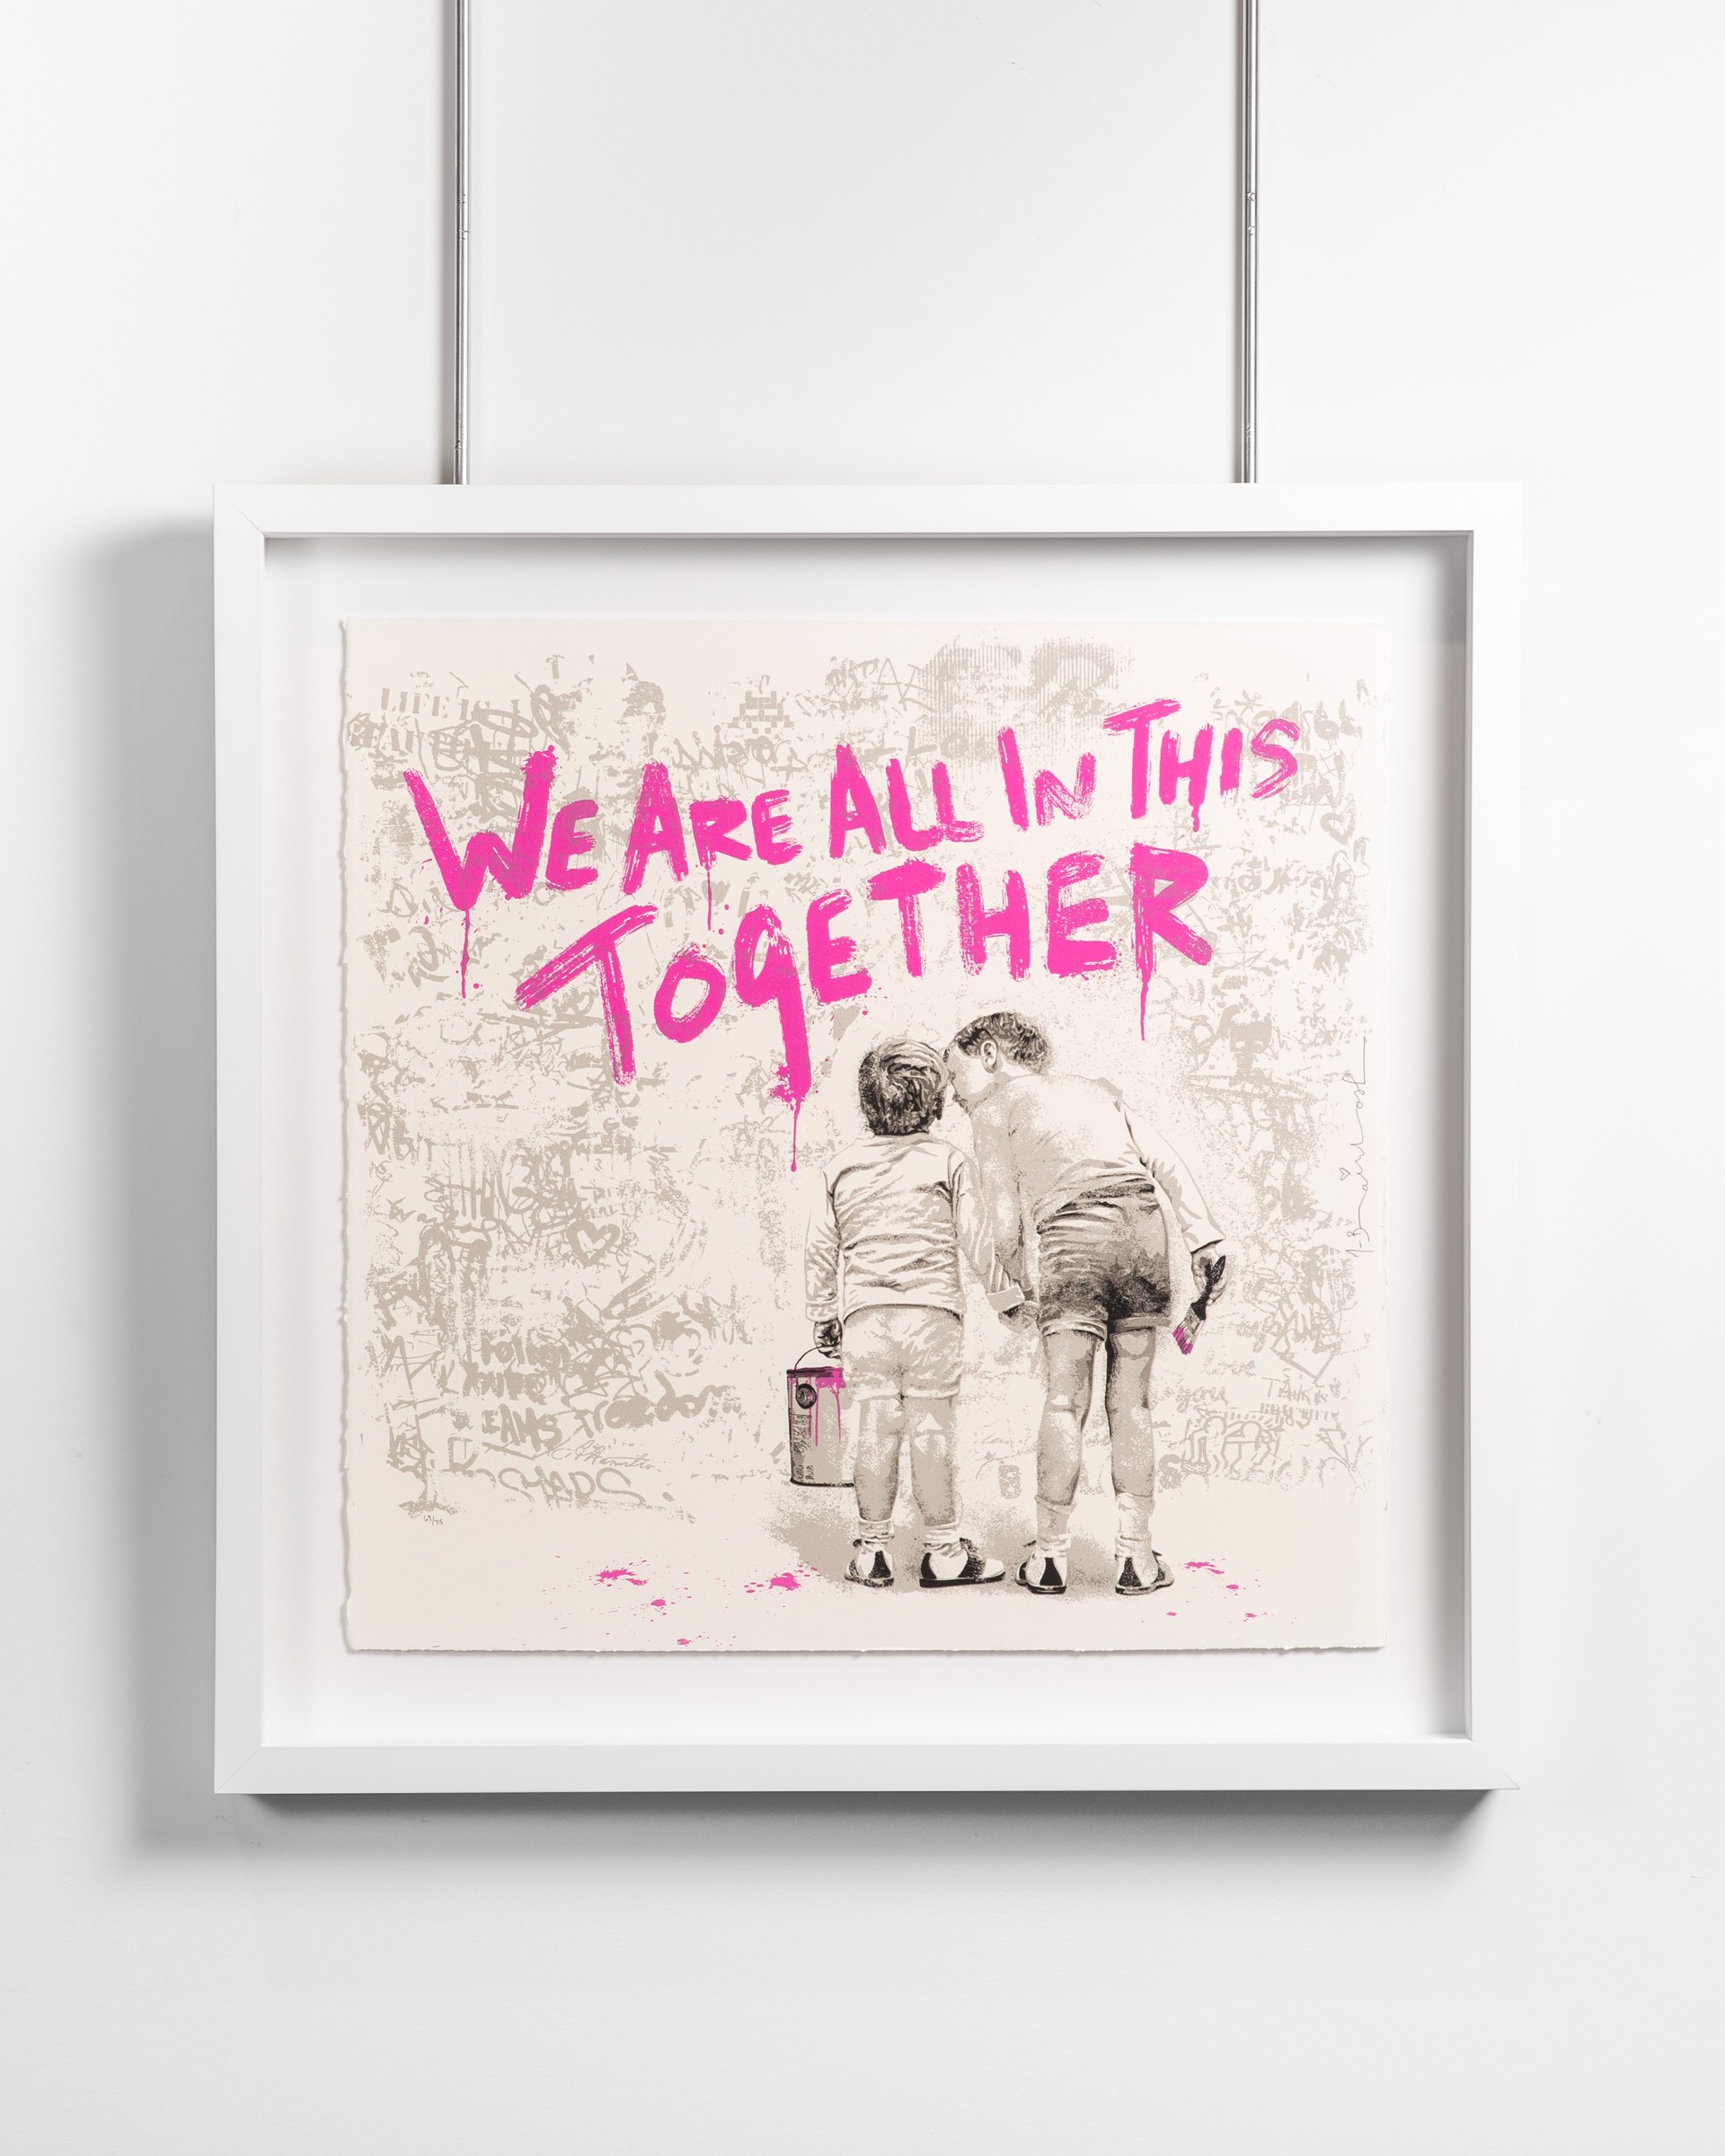 We Are All In This Together (fuschia) by Mr.Brainwash